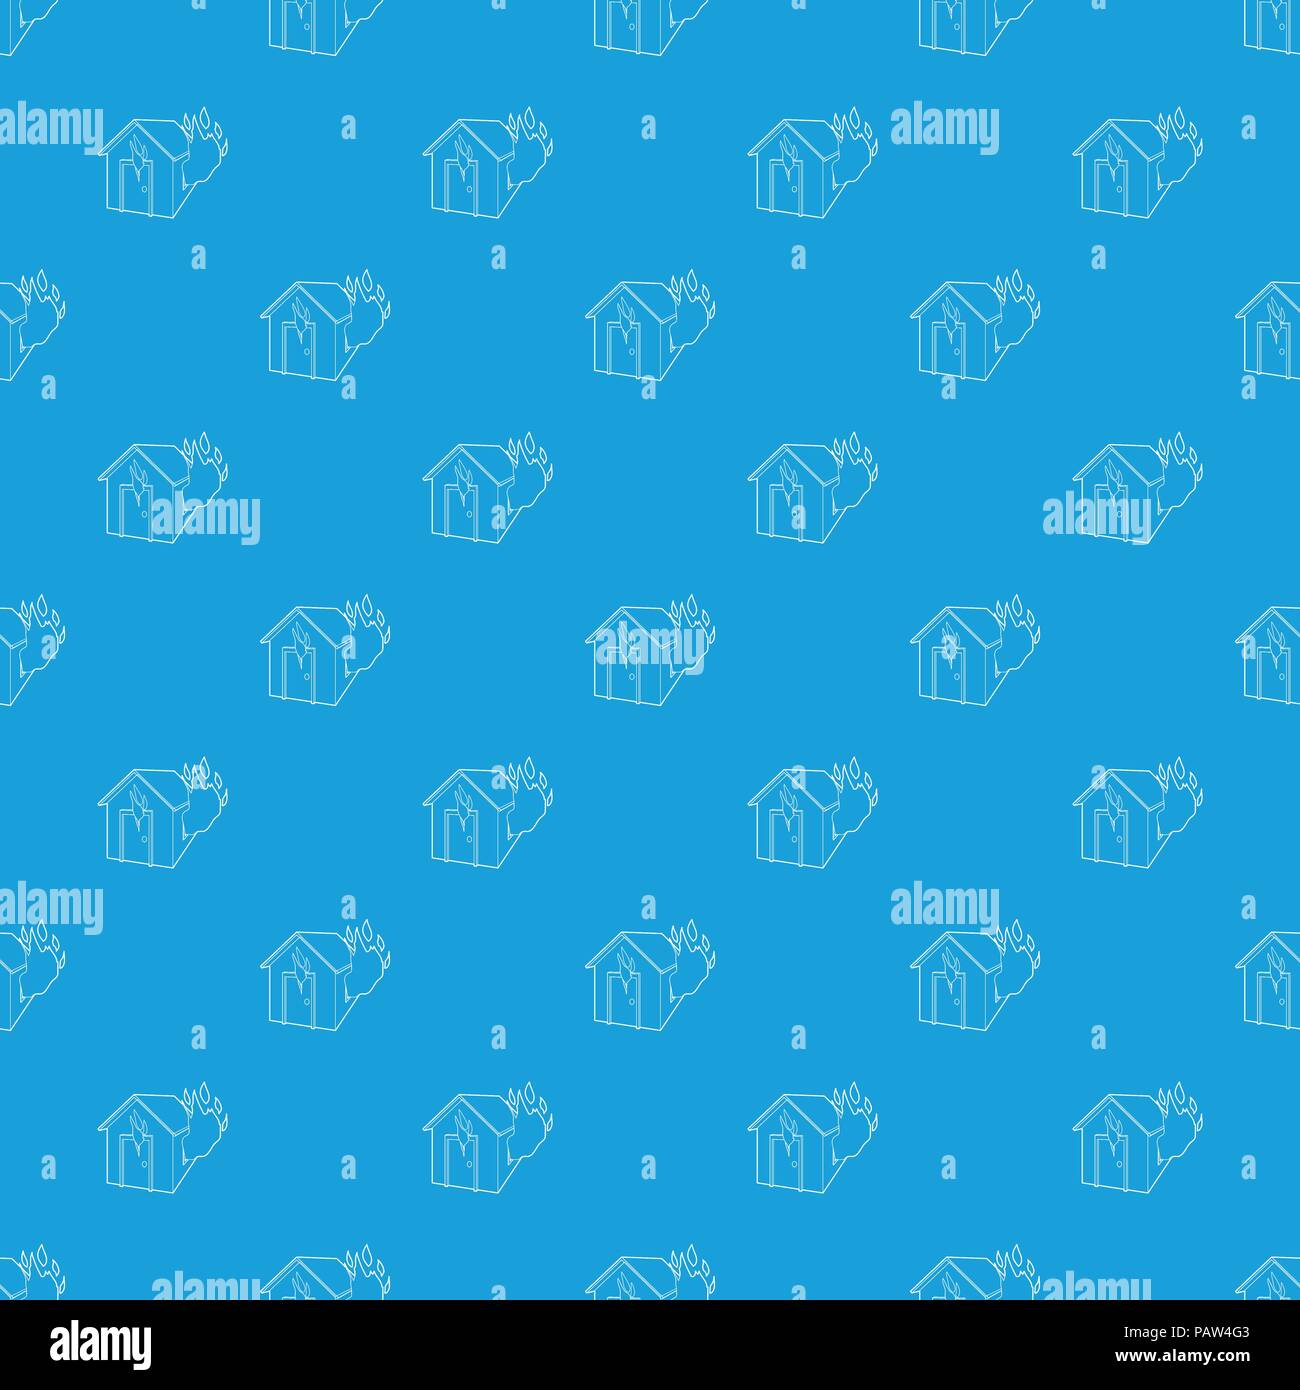 House on fire pattern vector seamless blue Stock Vector